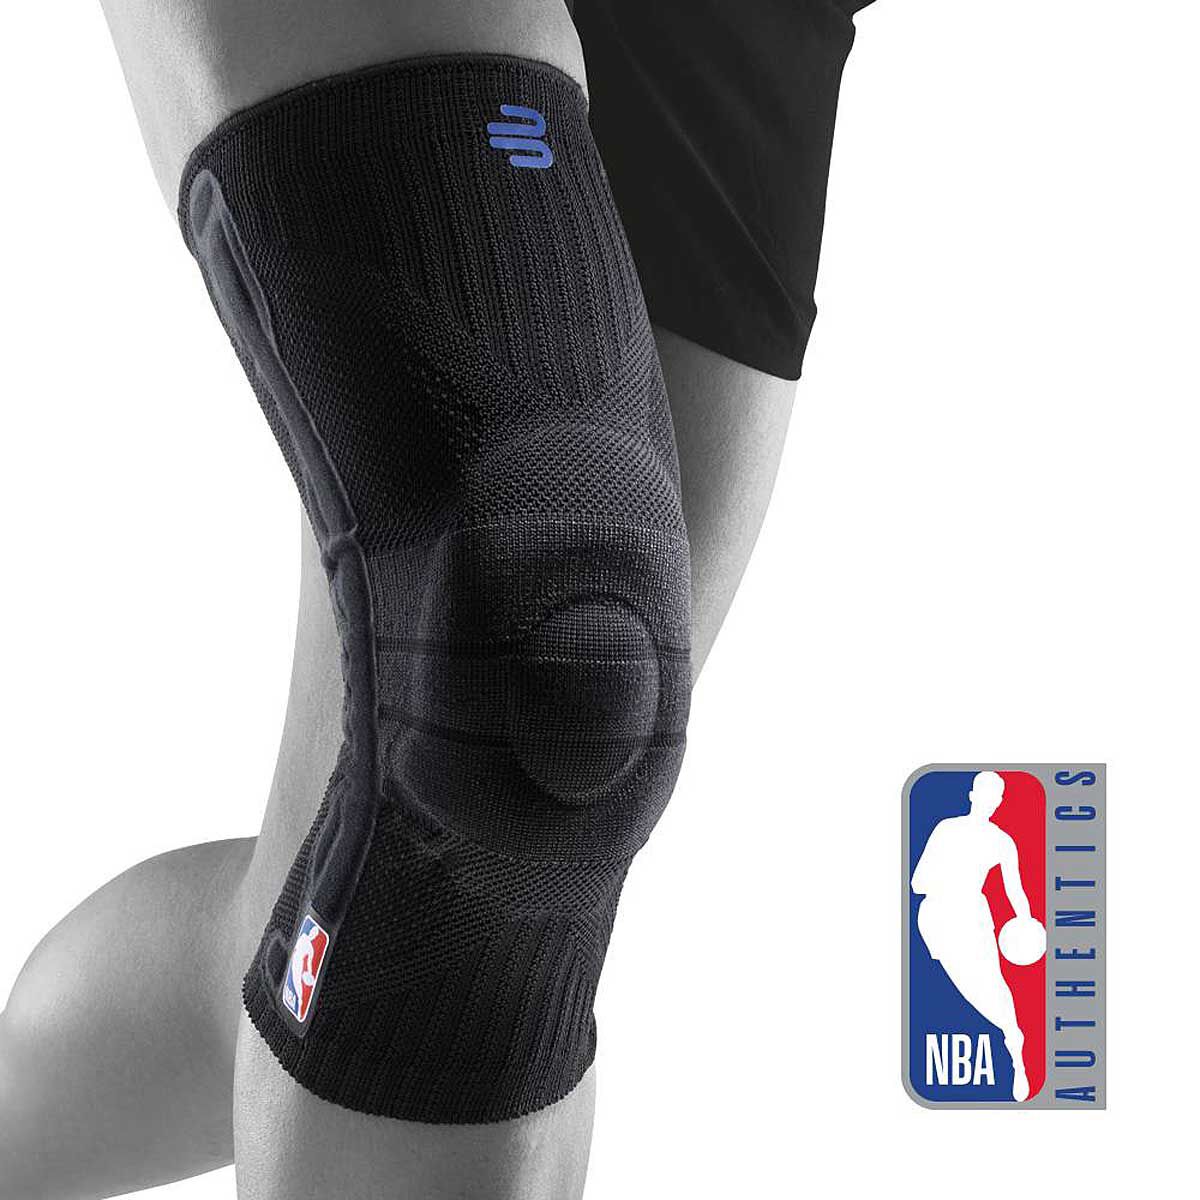 Trace Knee Pads with Strap in Black Pro Wrestling Gear Attire or Training Wear 